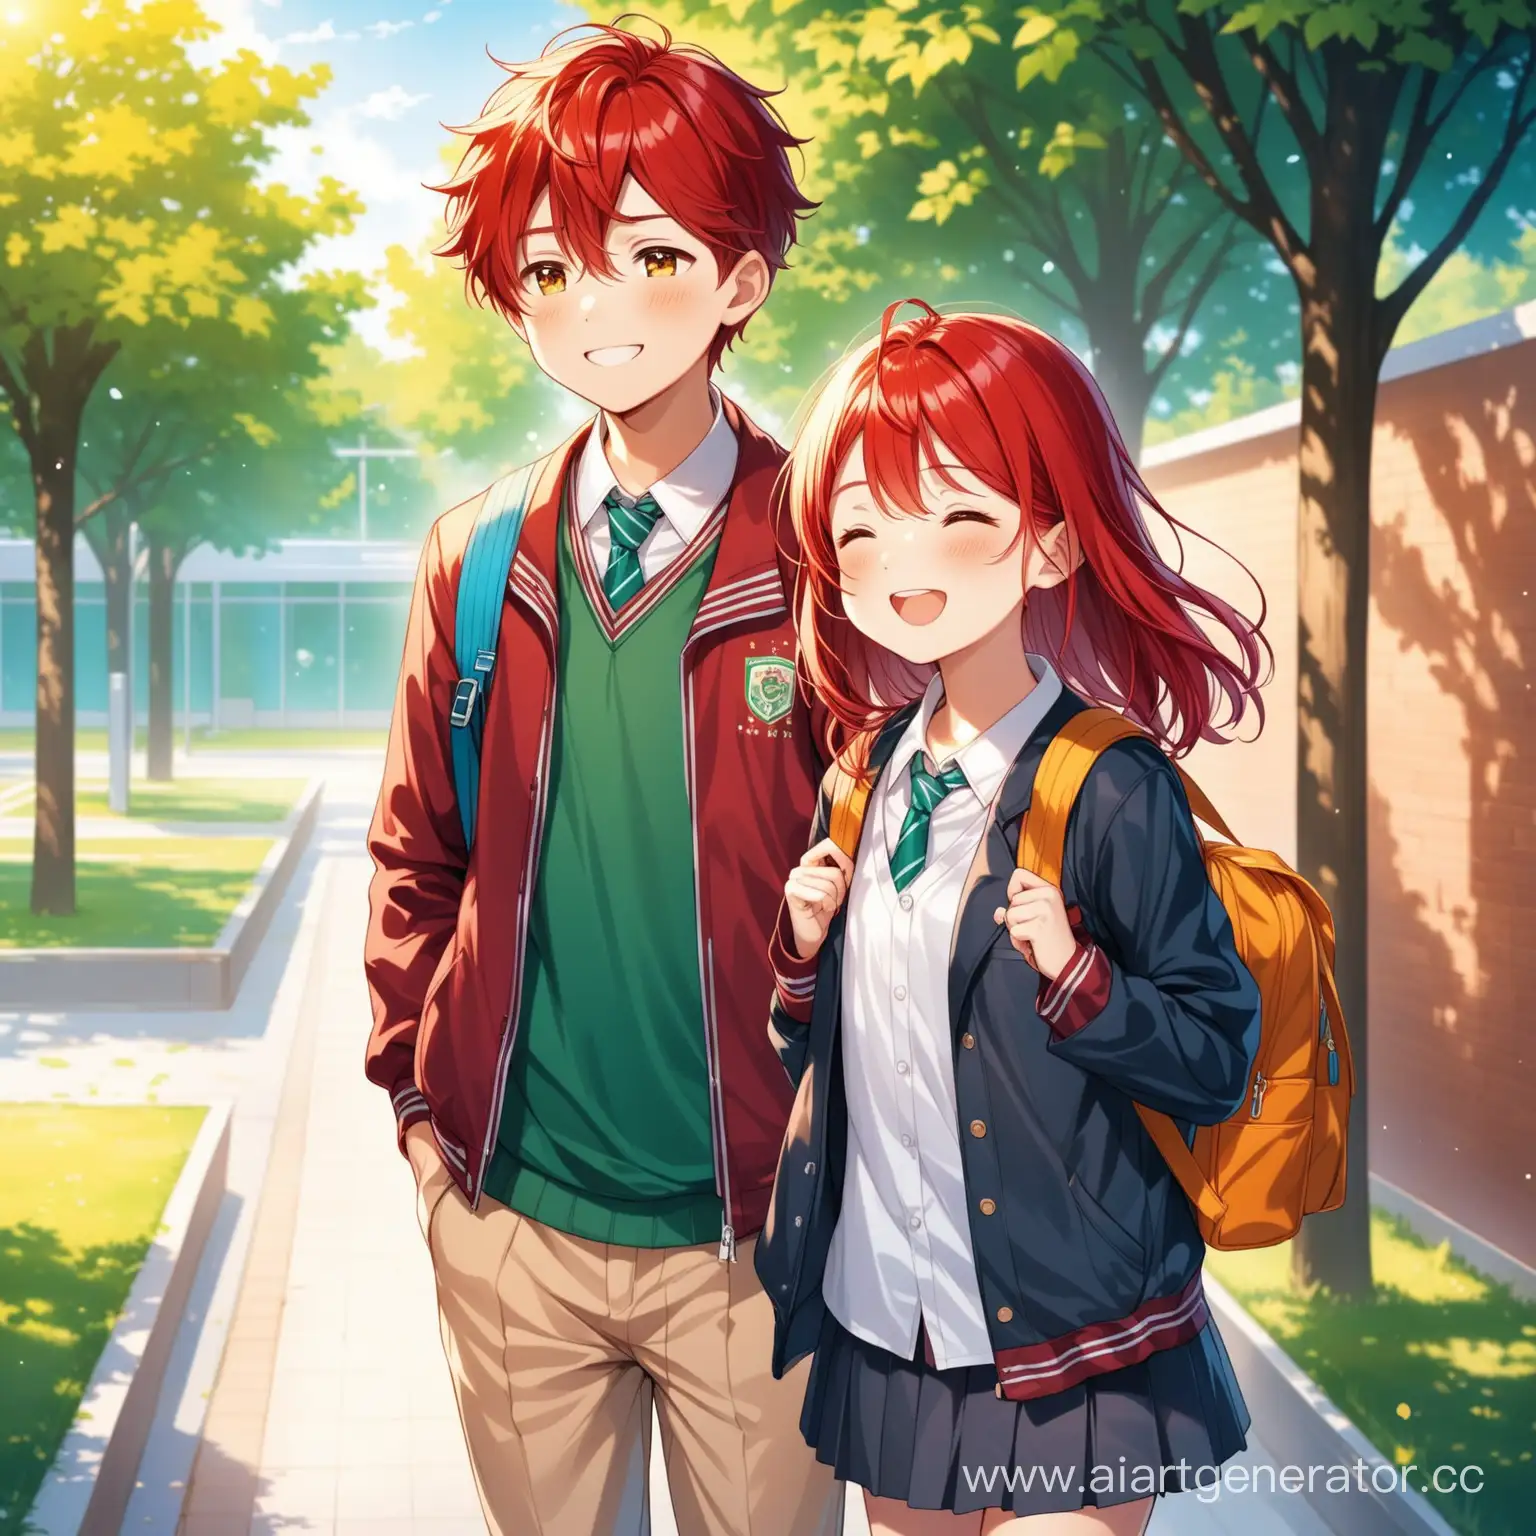 Excited-Kids-on-Their-First-Day-of-School-RedHaired-Girl-and-Boy-in-Jackets